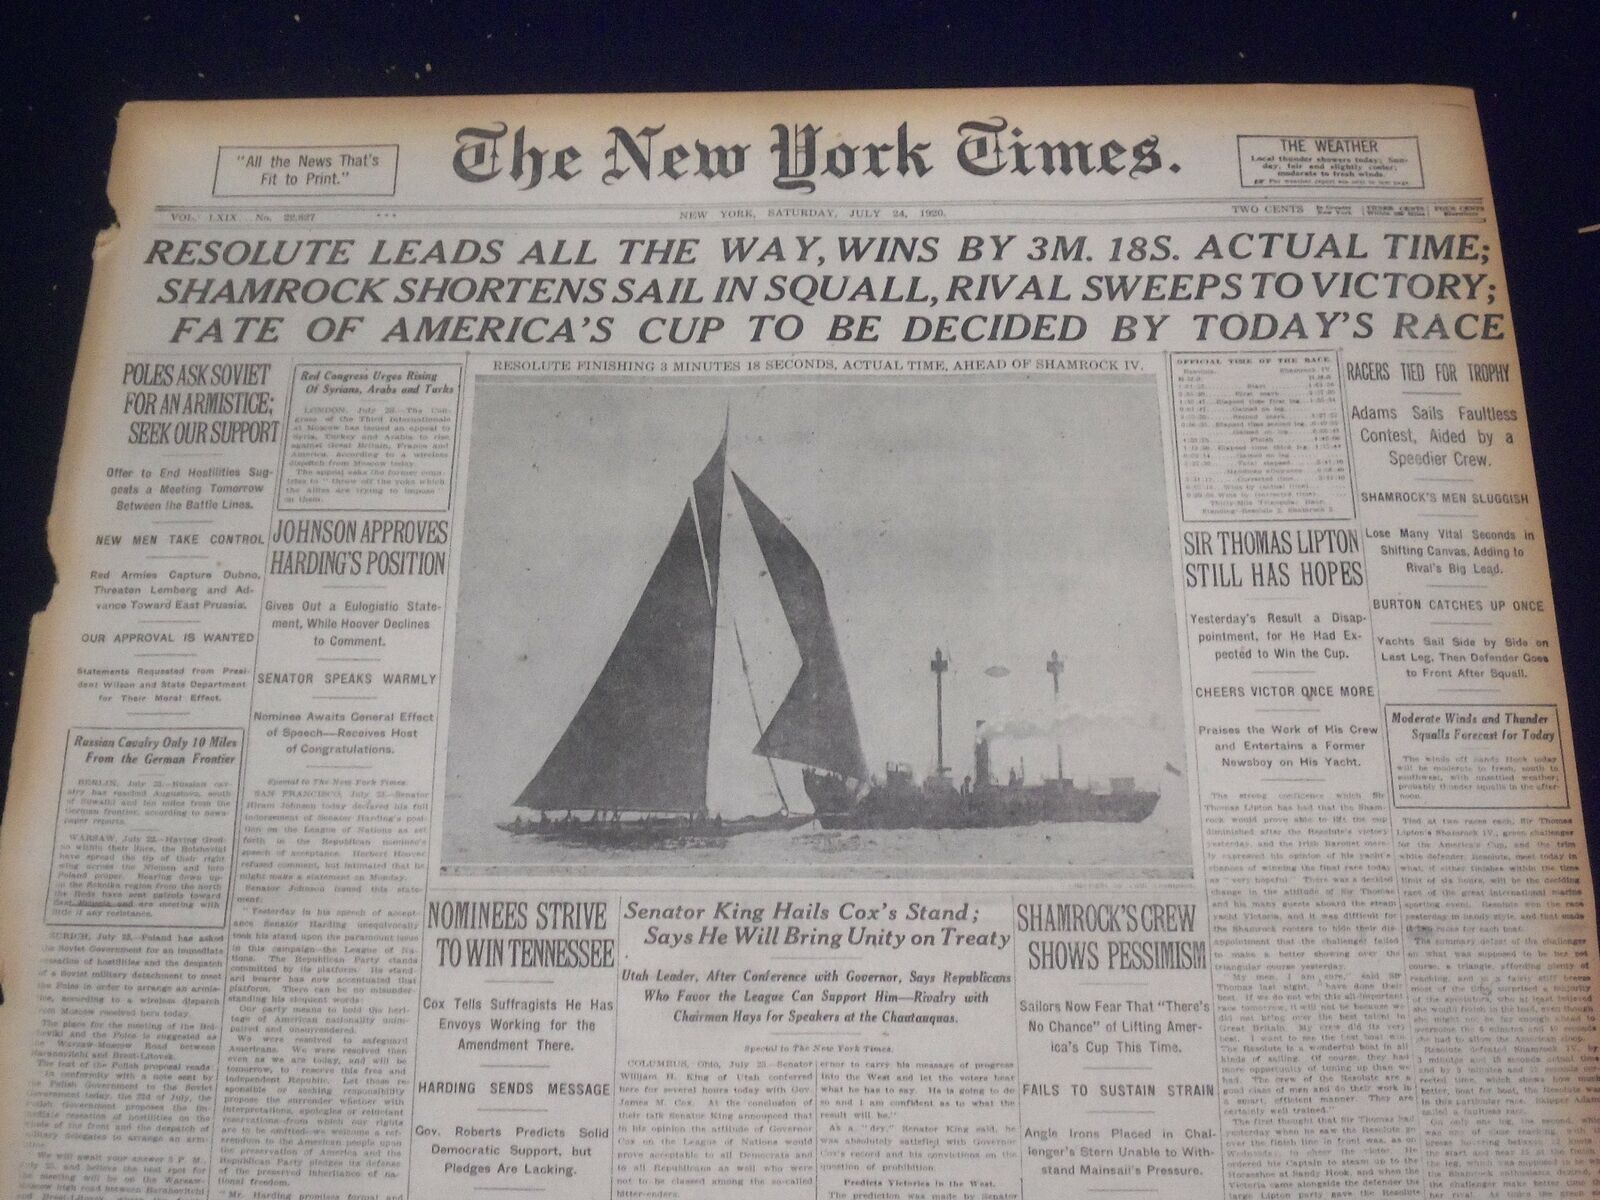 1920 JULY 24 NEW YORK TIMES - RESOLUTE WINS CUP TO BE DECIDED TODAY - NT 9339